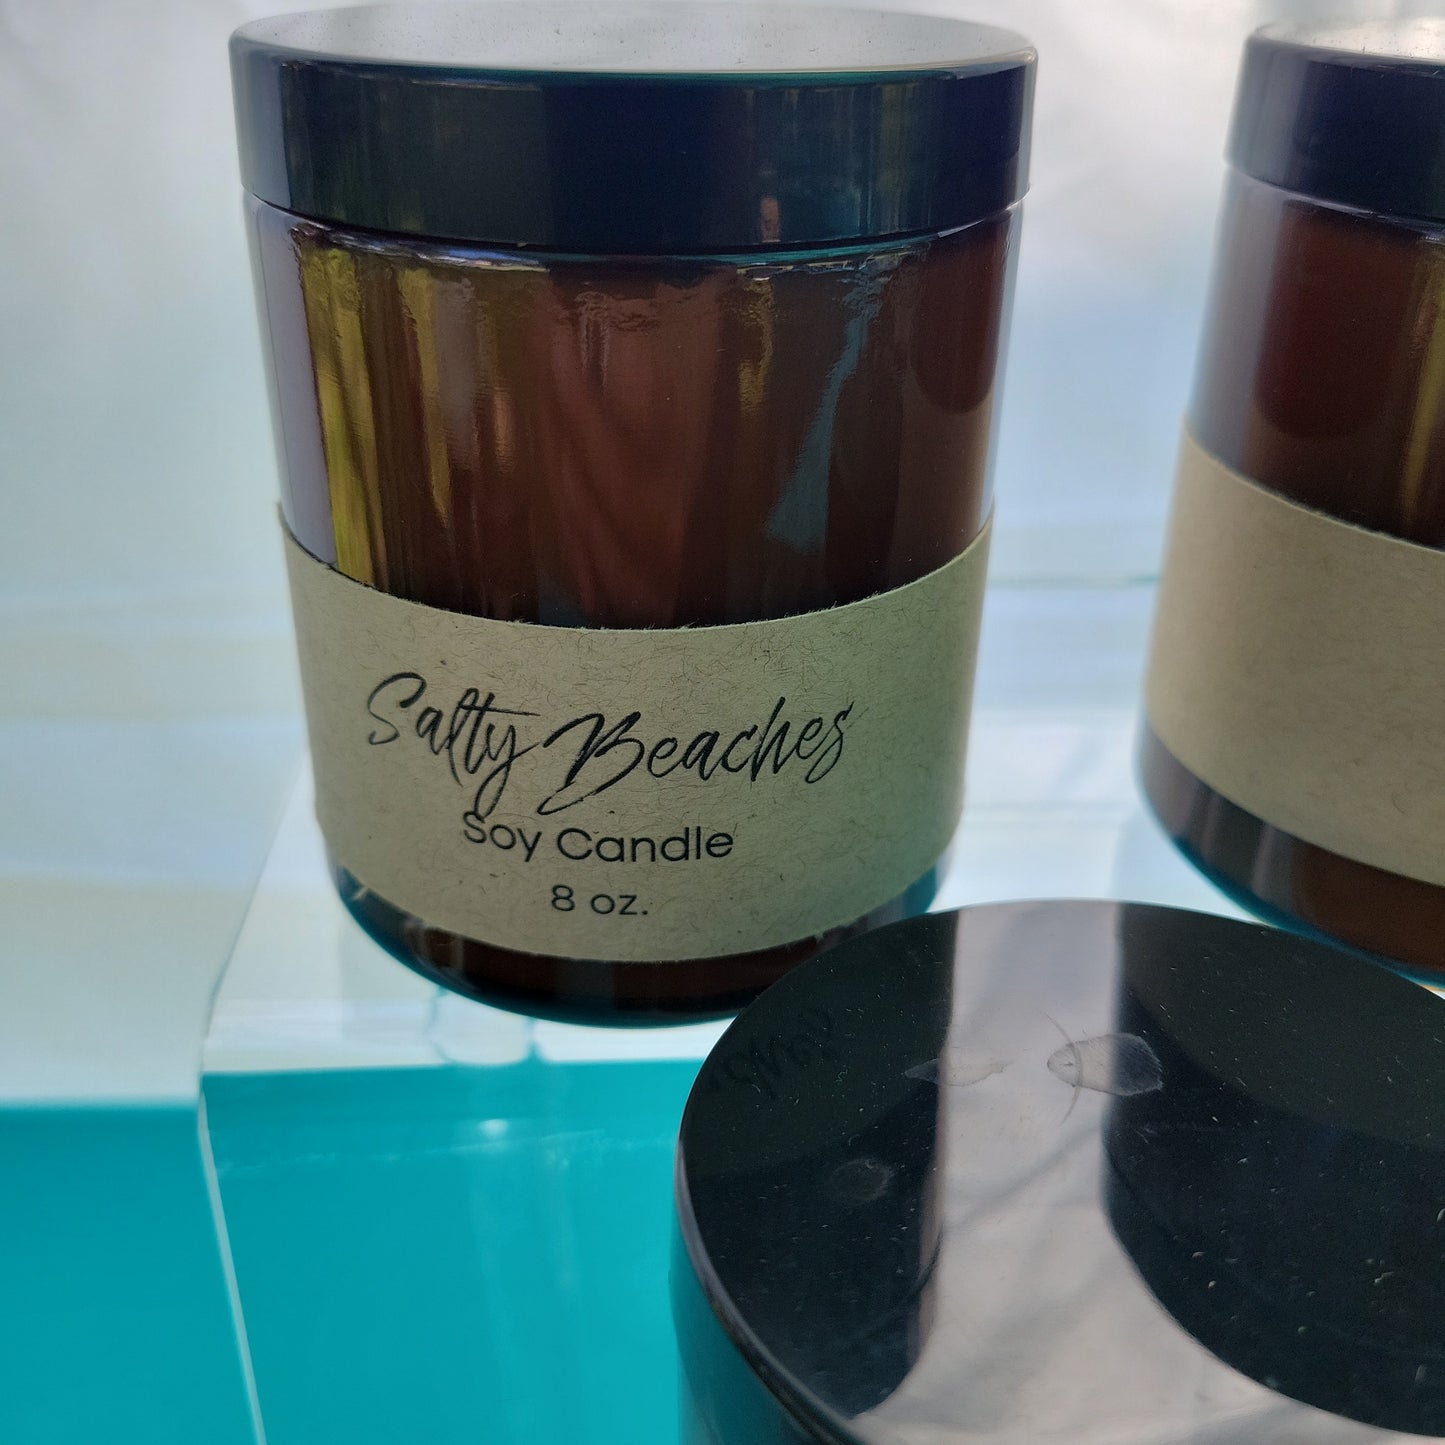 8 oz. Salty Beaches Soy Candle